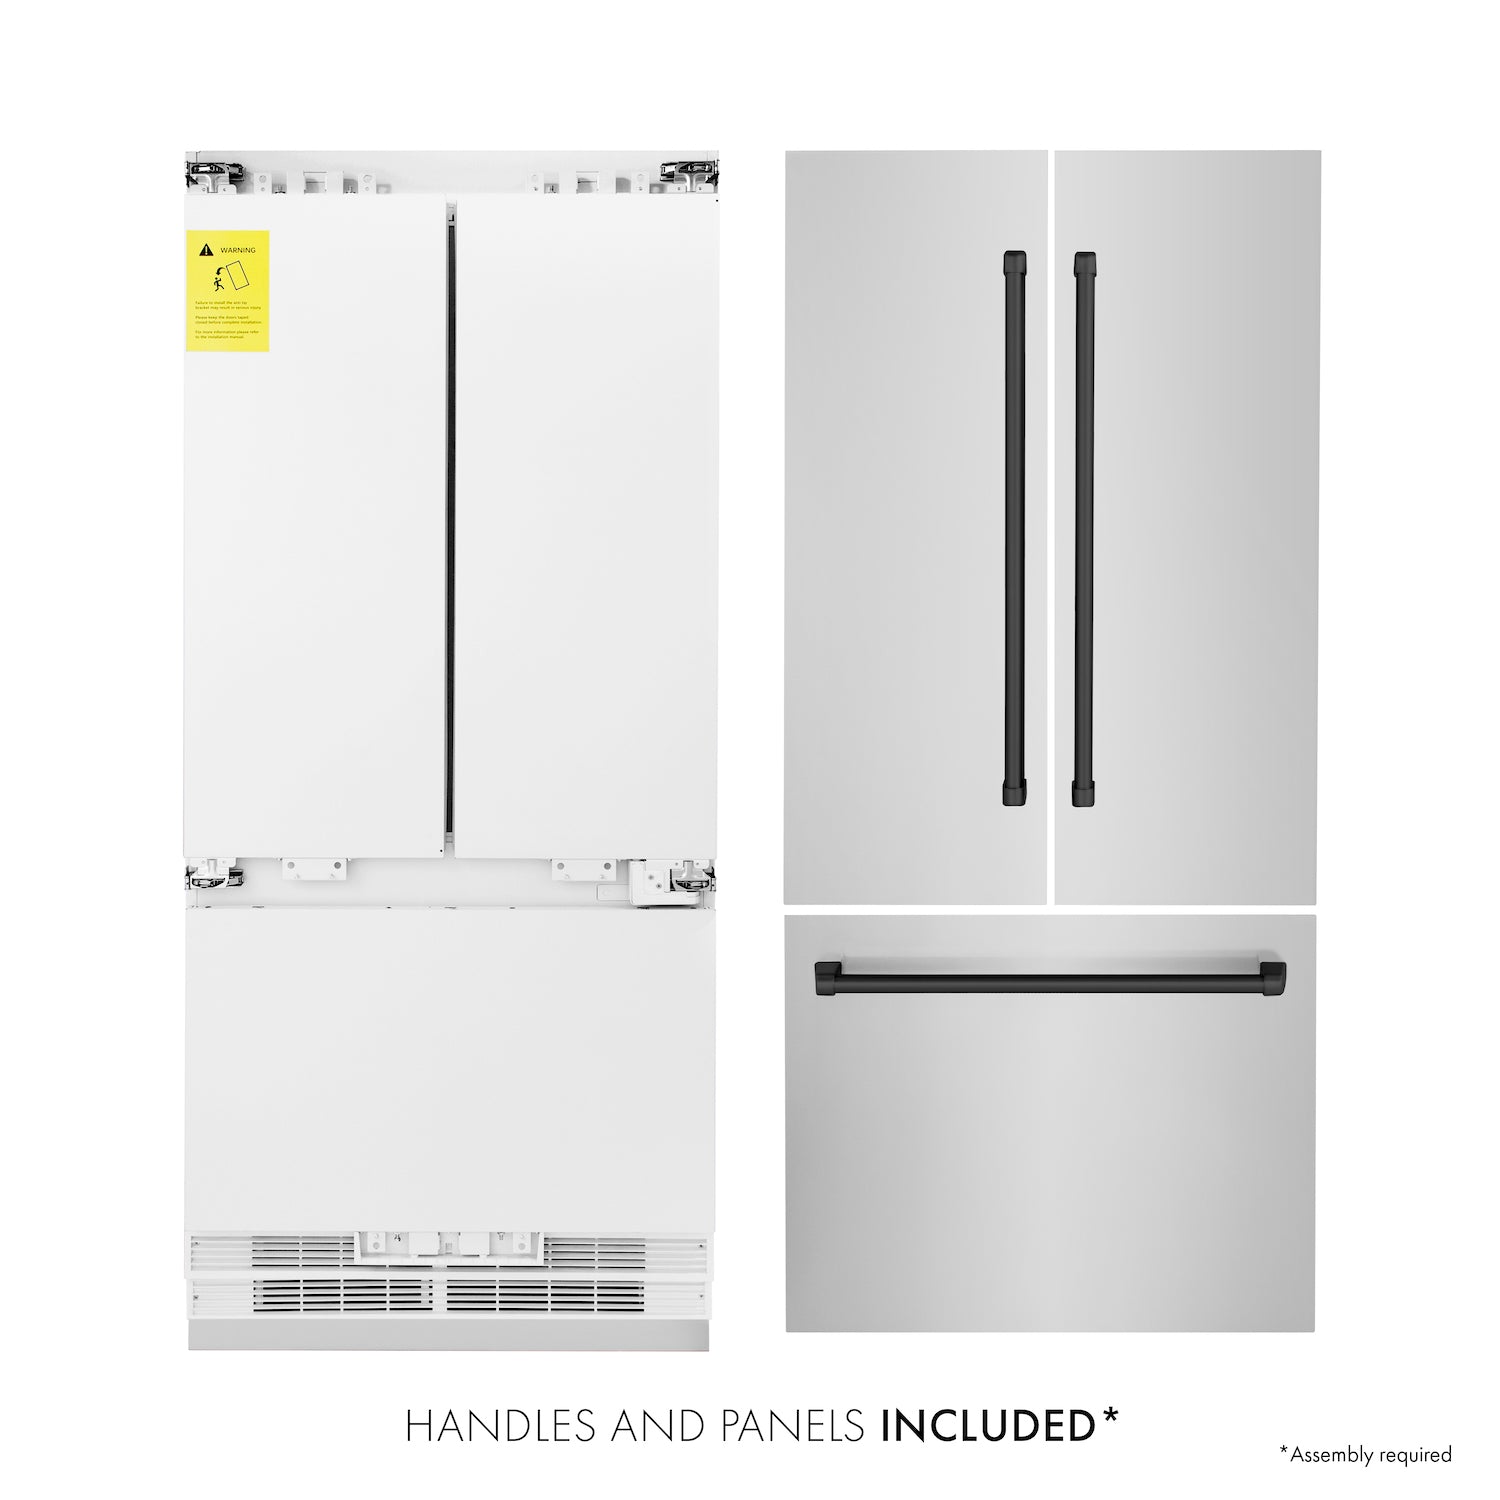 ZLINE 36" Built-in French Door Refrigerator with Stainless Steel panels front.